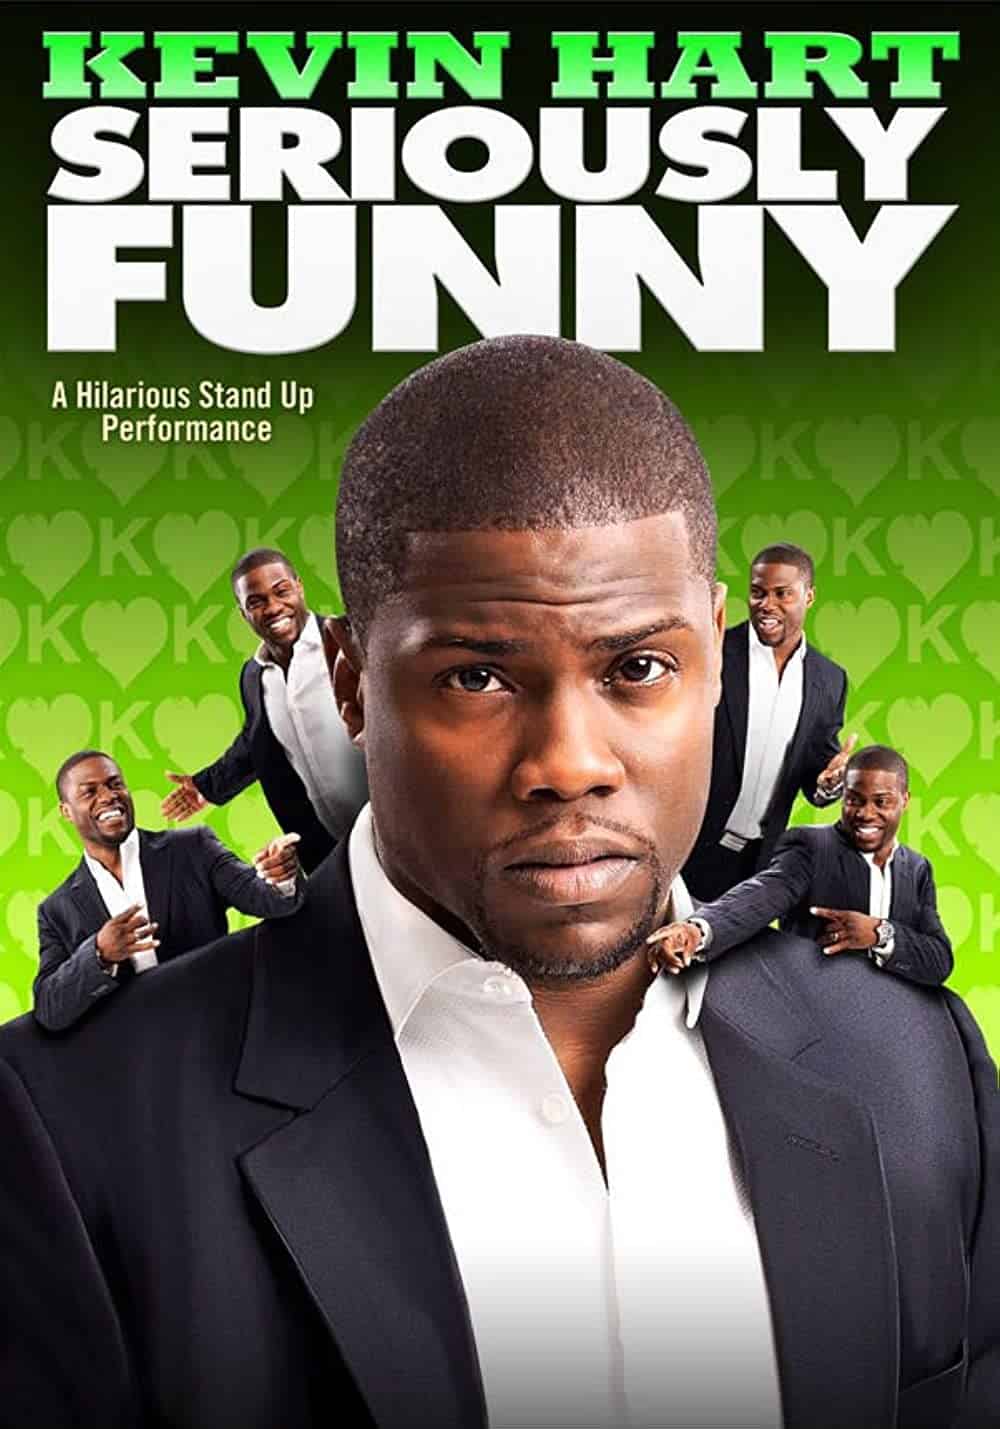 Kevin Hart Seriously Funny (2010) Best Kevin Hart Movies (Ranked)